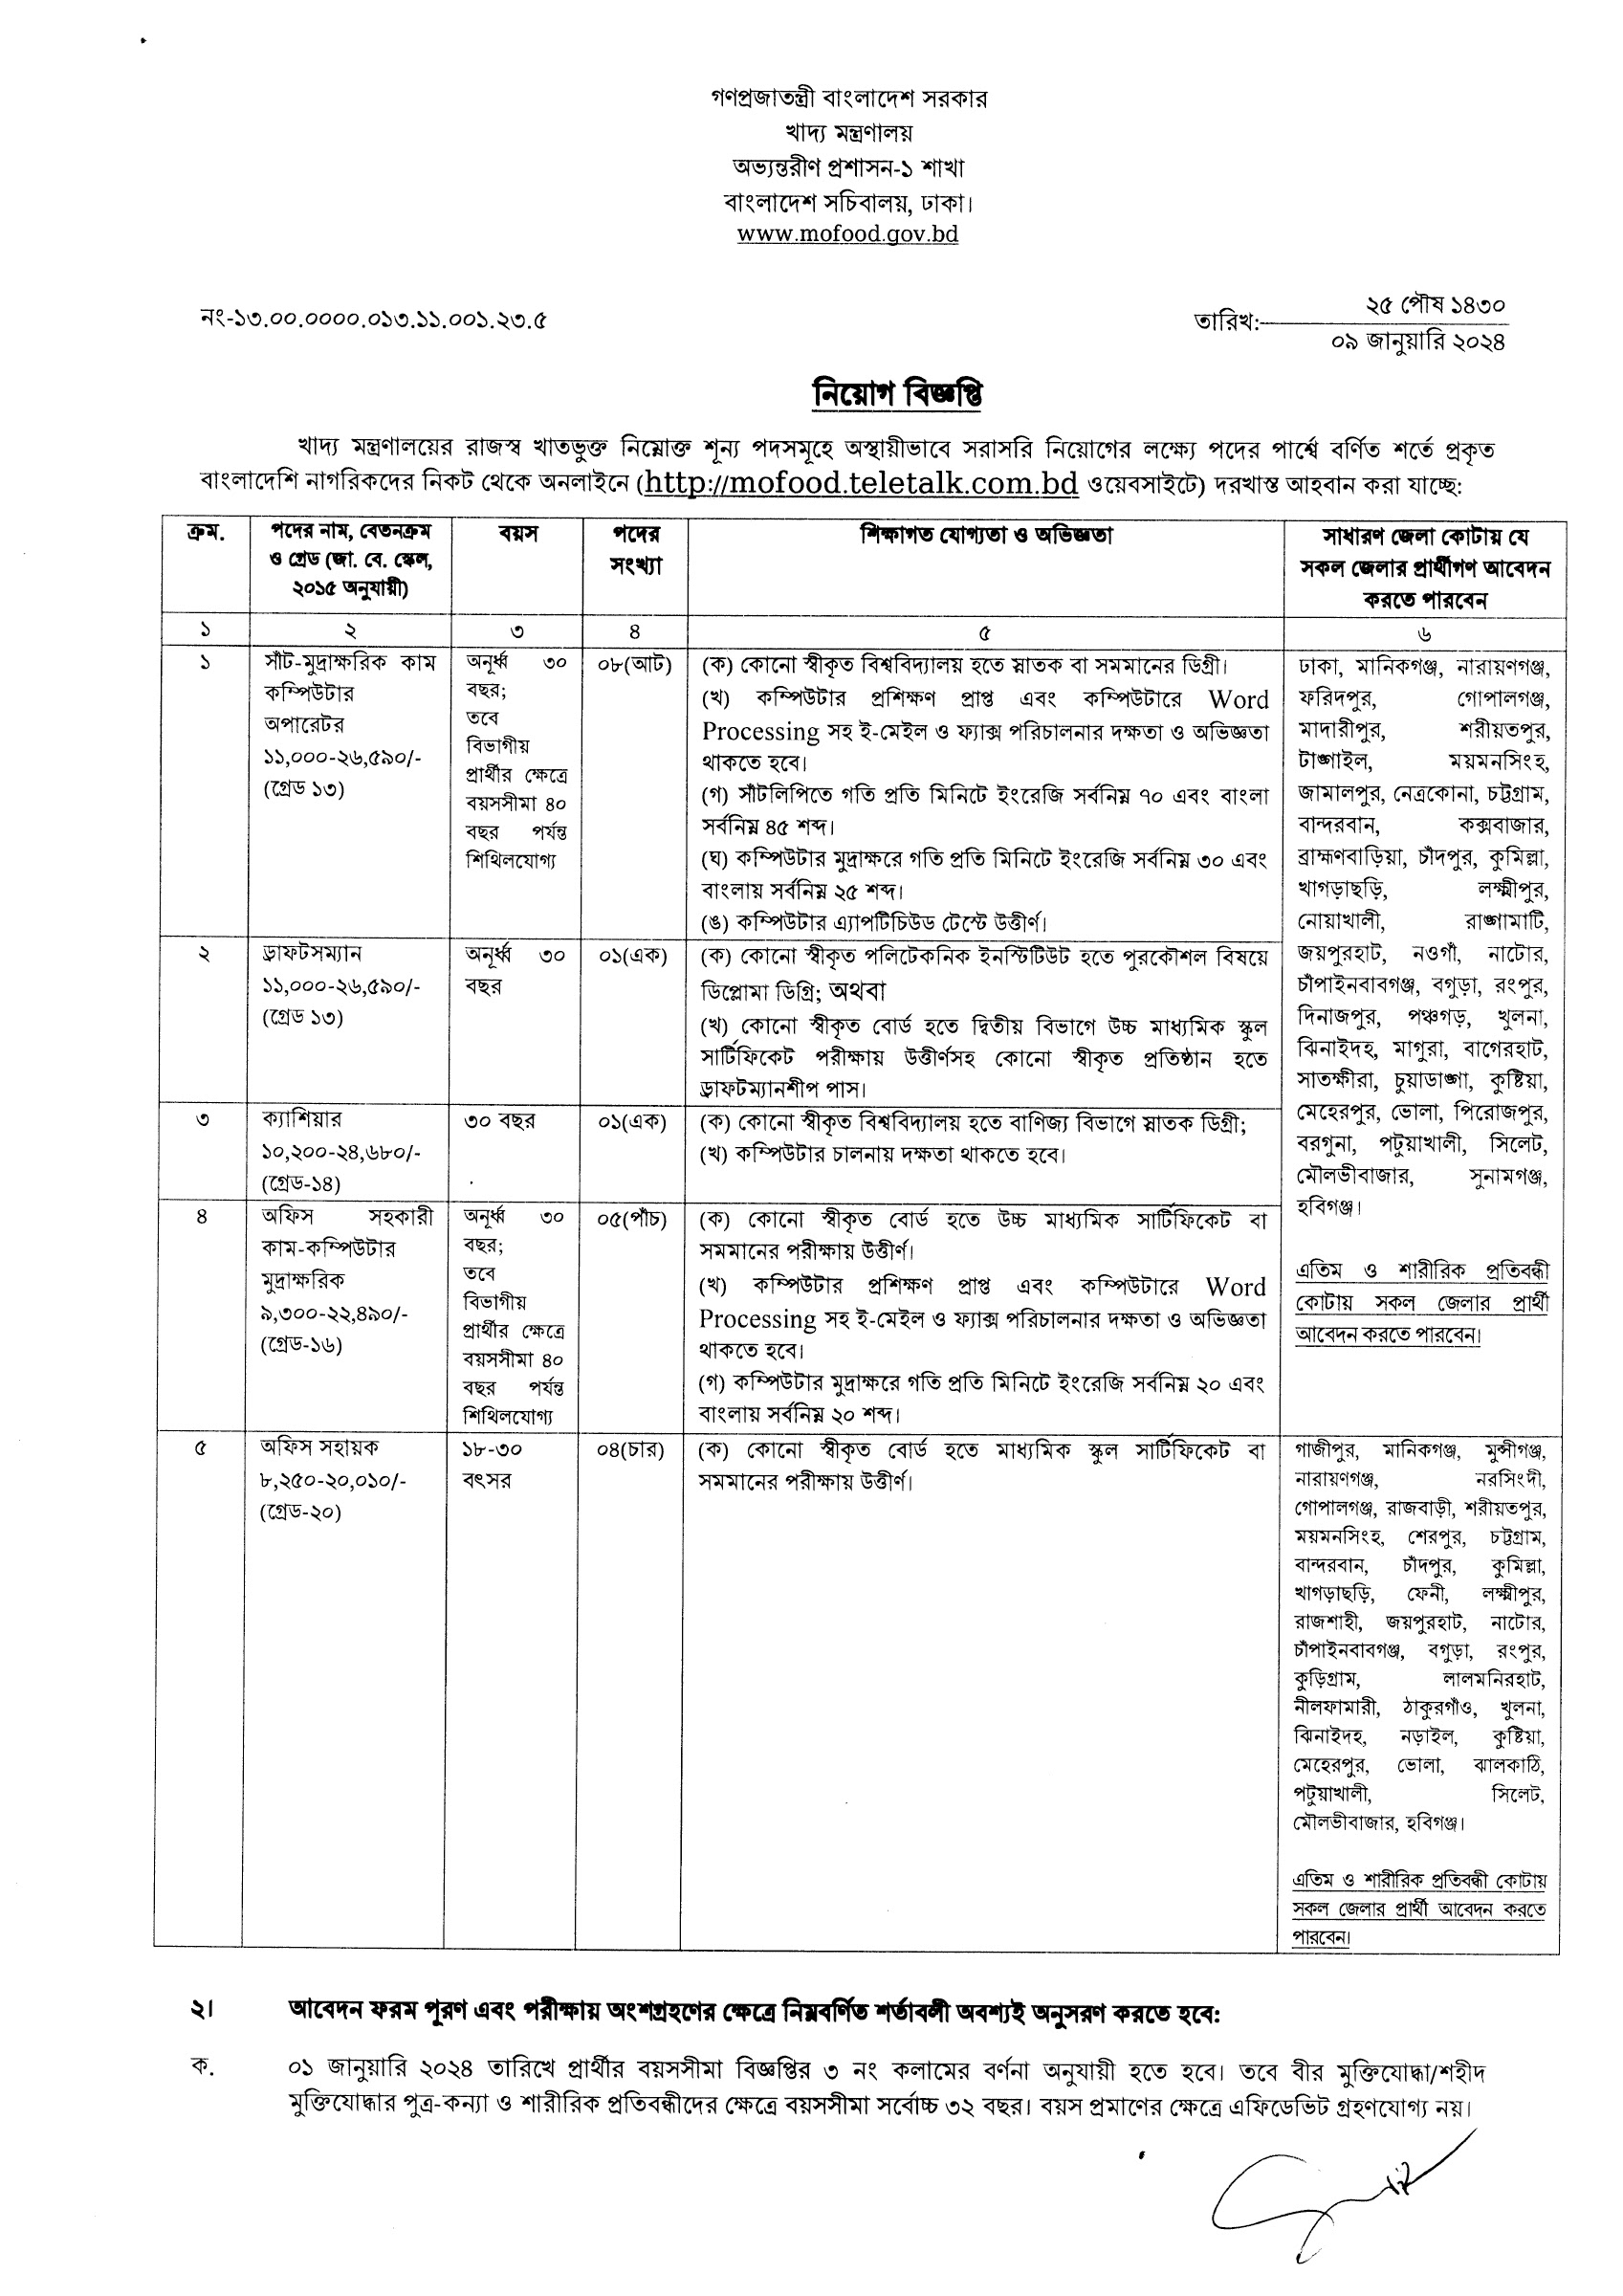 Official Image of Ministry of Food Job Circular 2024.